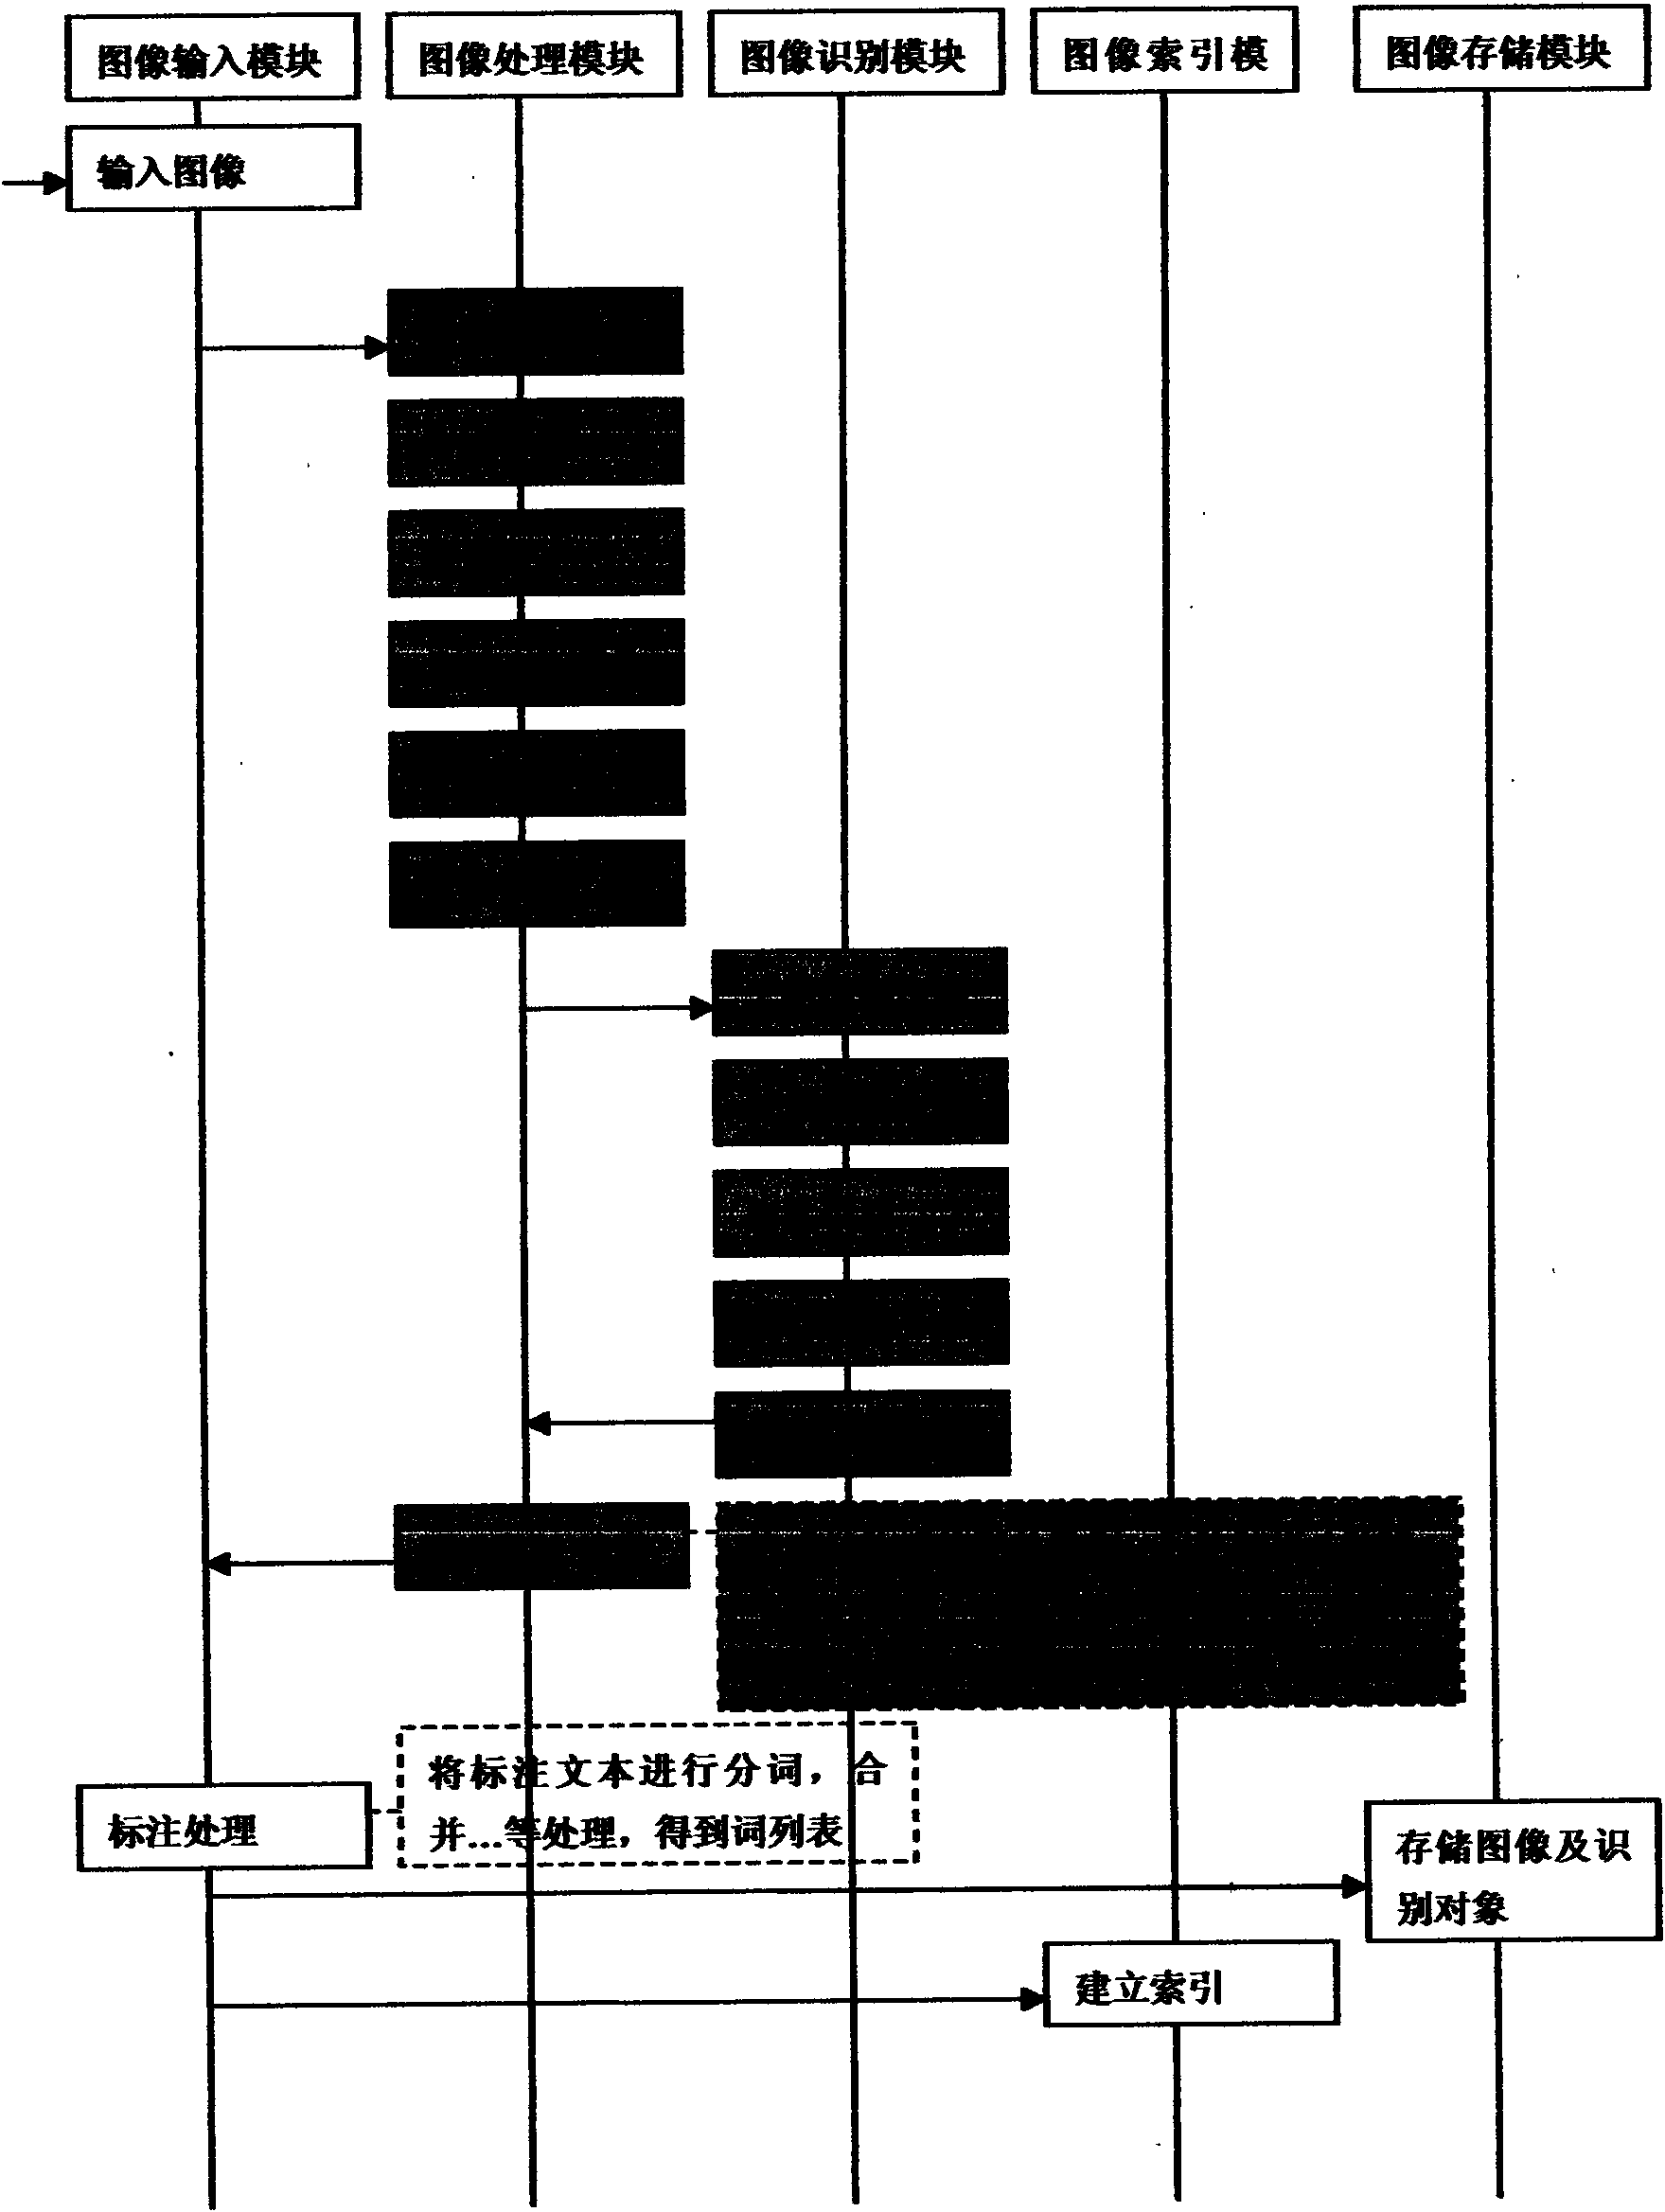 Realization method of image searching system based on image recognition